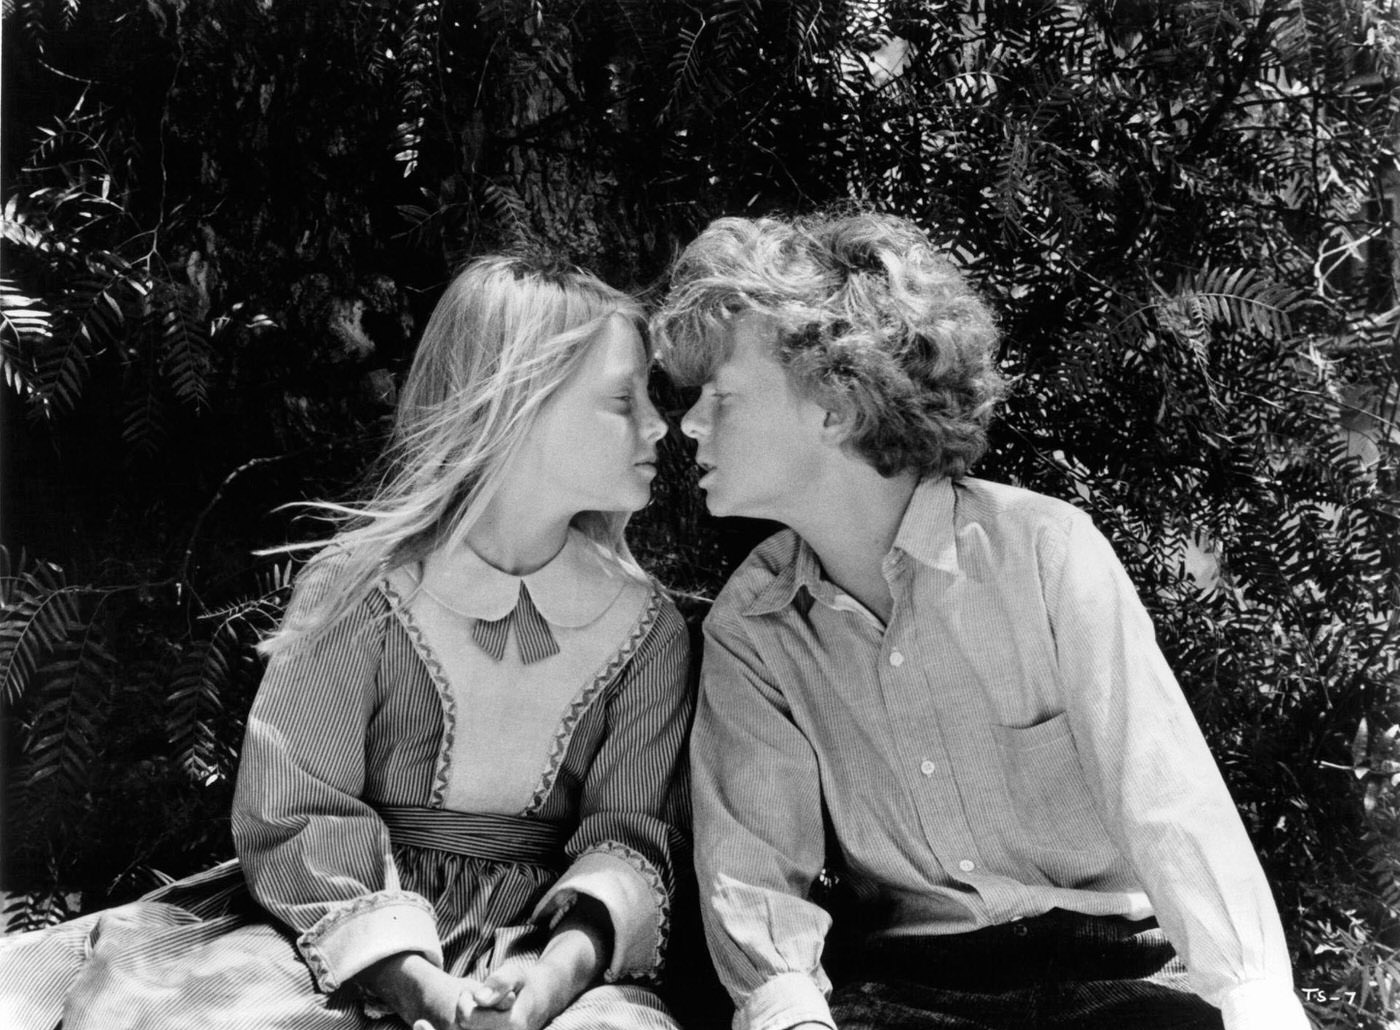 Jodie Foster and Johnny Whitaker about to kiss in 'Tom Sawyer', 1973.